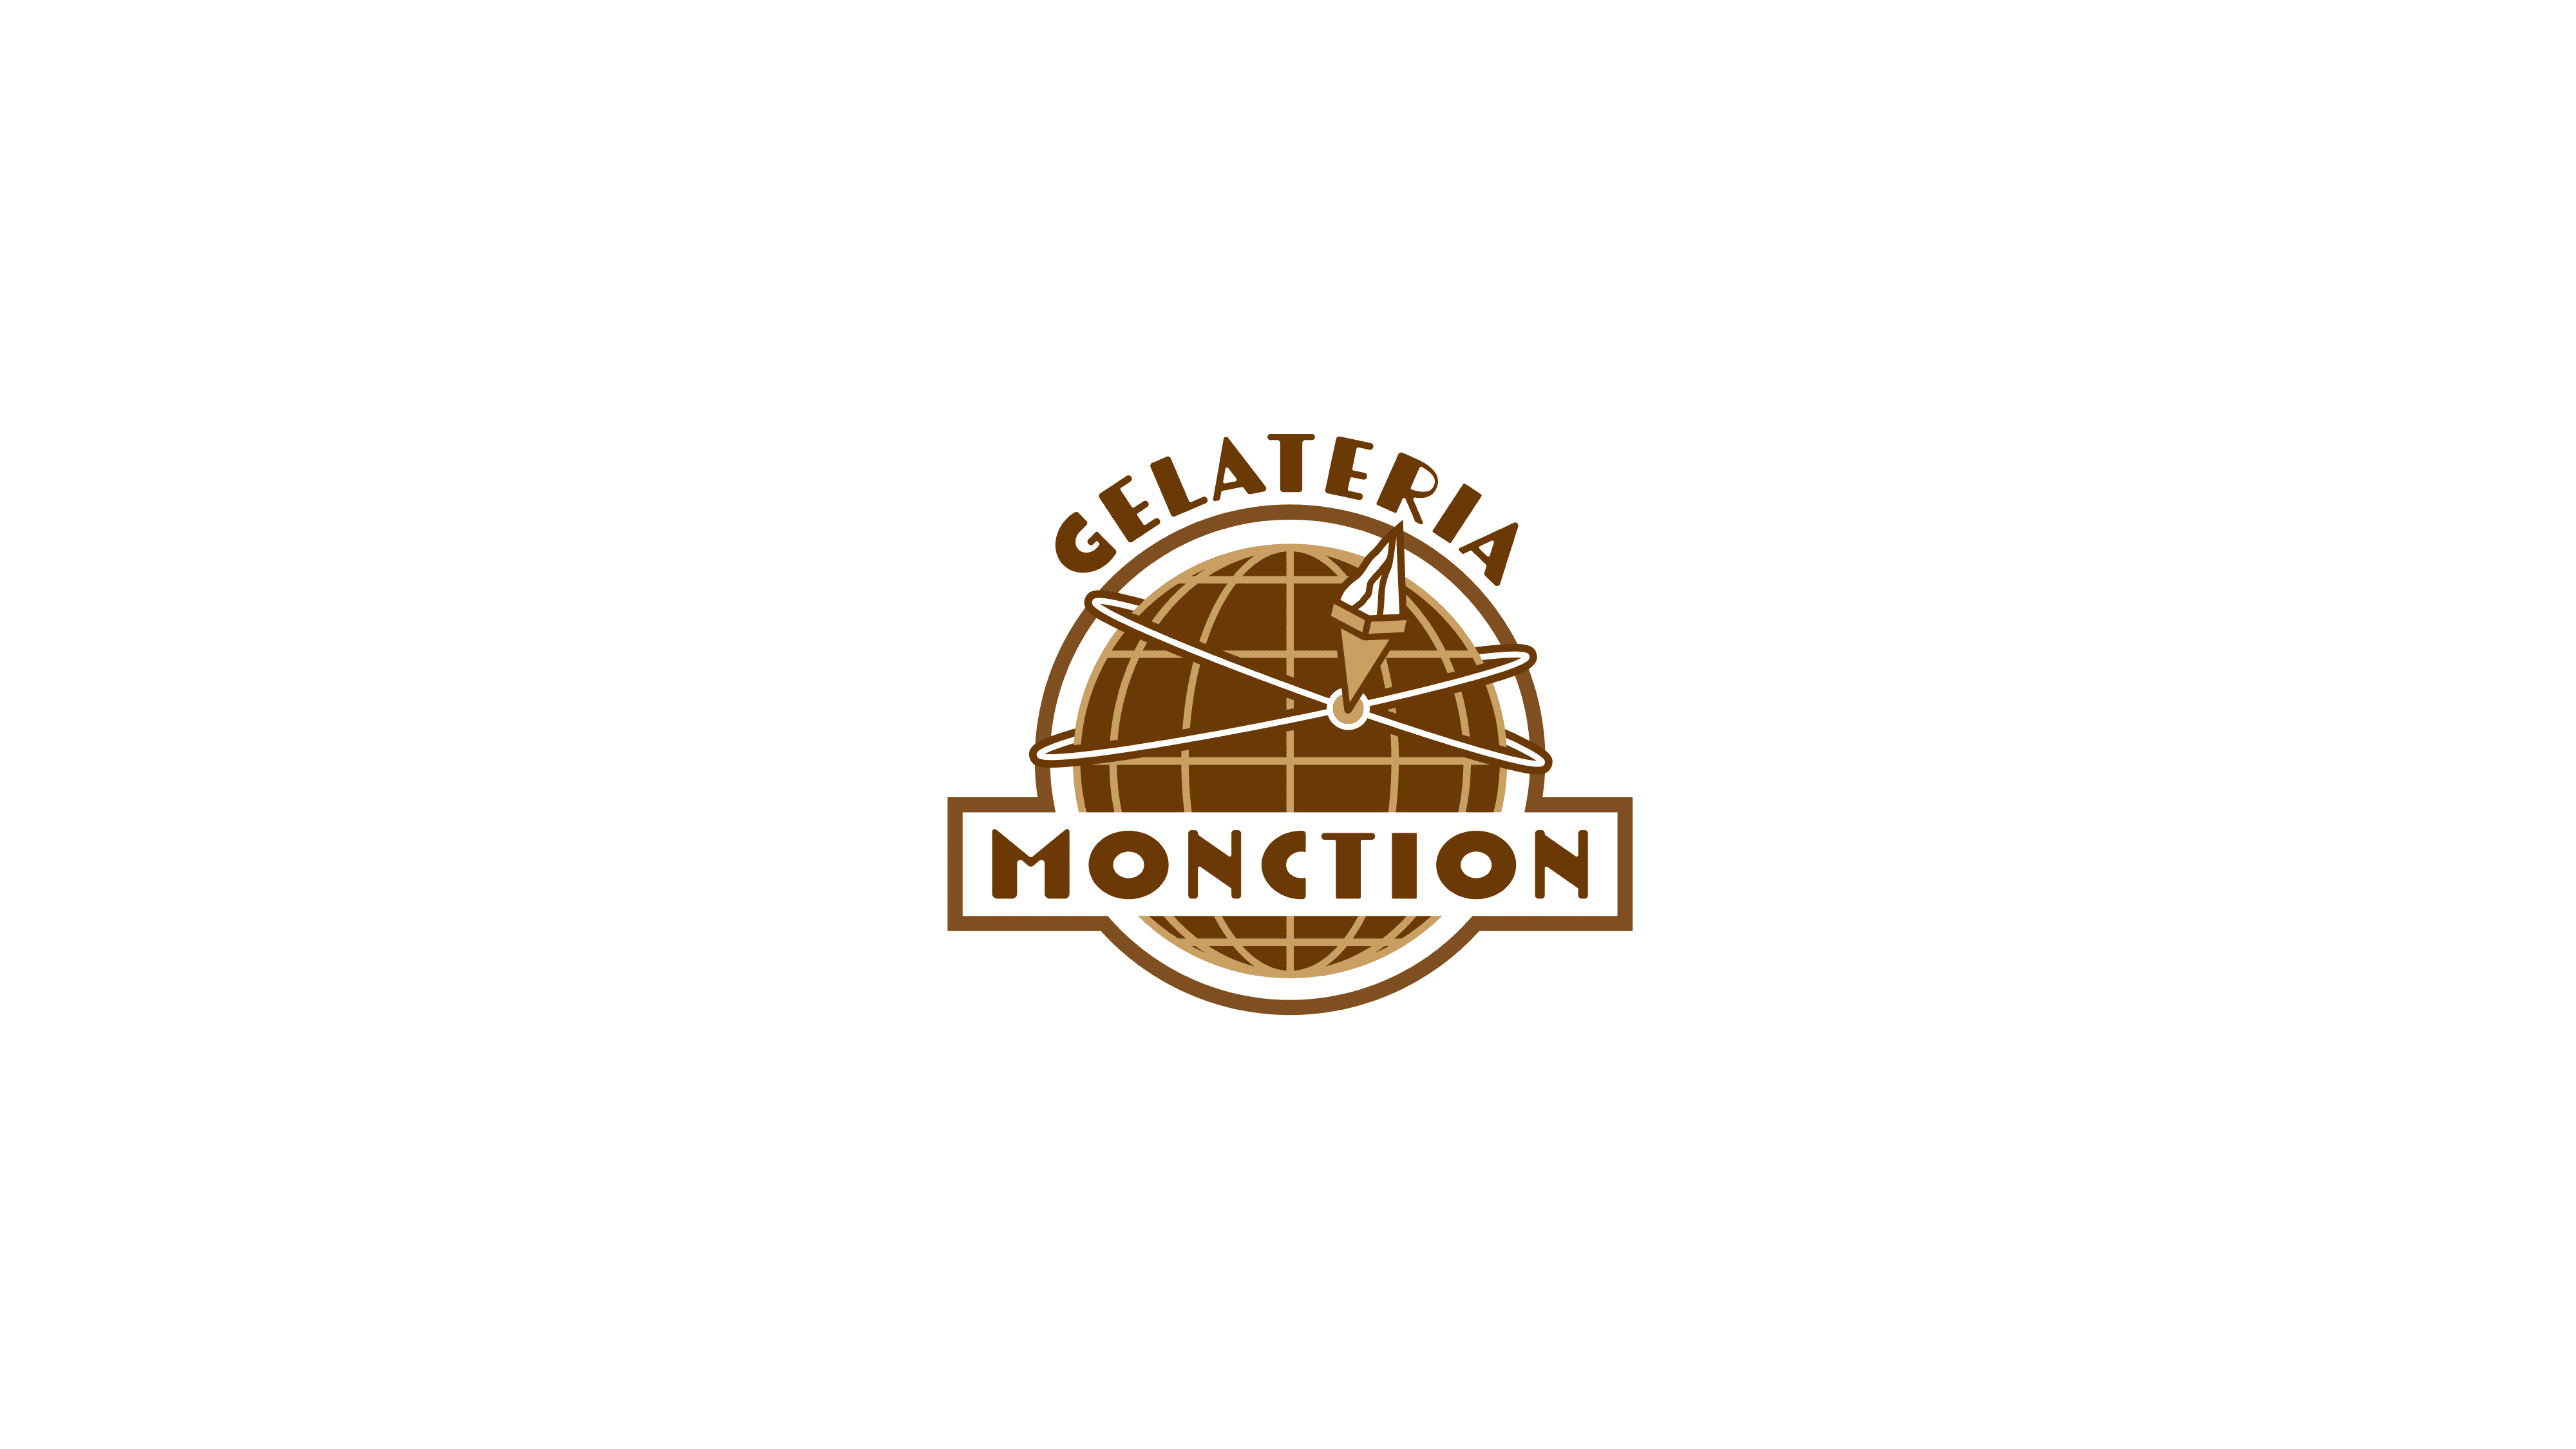 Gelateria Monction | 神戸のジェラート店